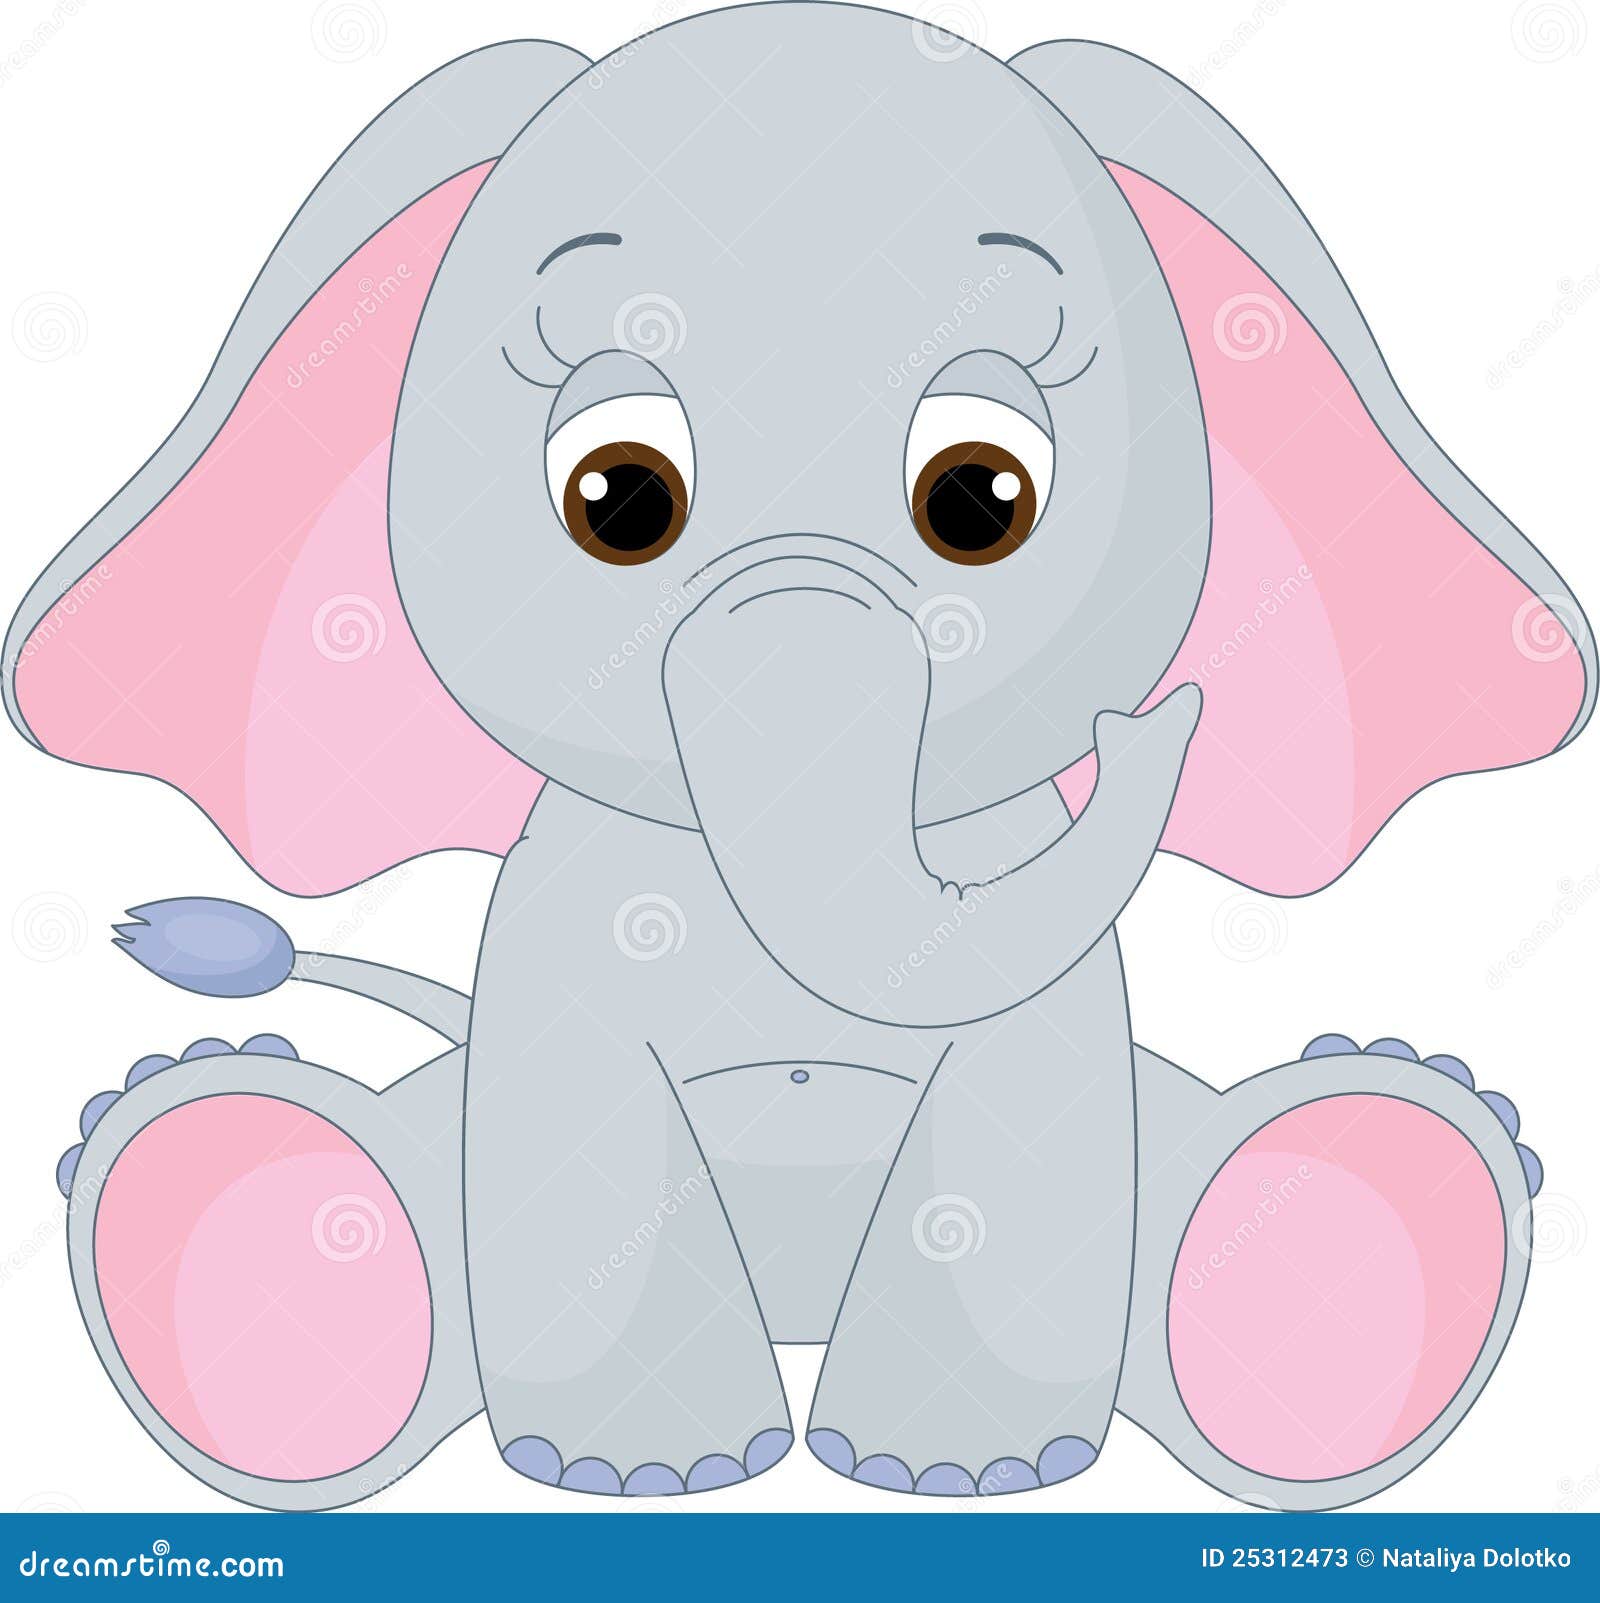 Cute baby elephant stock vector. Illustration of baby ...